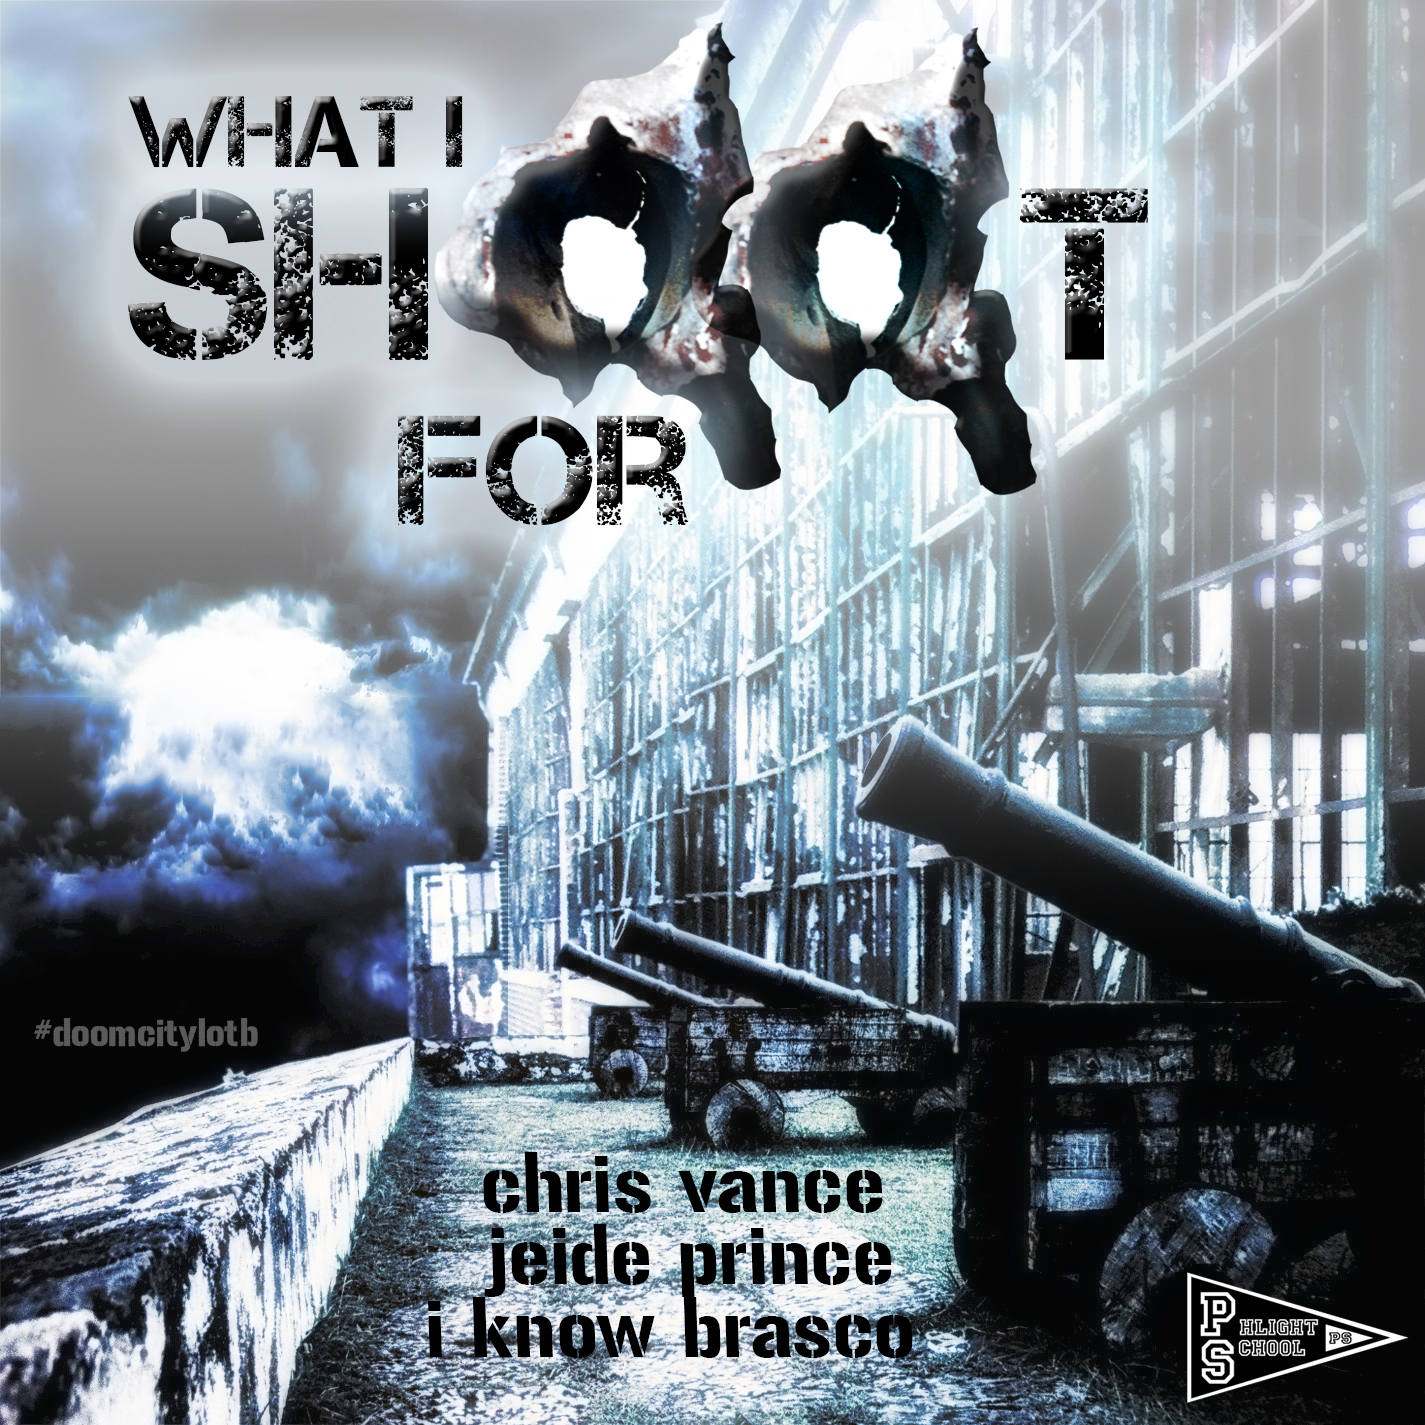 chris-vance-x-i-know-brasco-x-jeide-prince-what-i-shoot-for-prod-by-dre-flow-HHS1987-2013 Chris Vance x I-Know Brasco x Jeide Prince - What I Shoot For (Prod. by Dre Flow)  